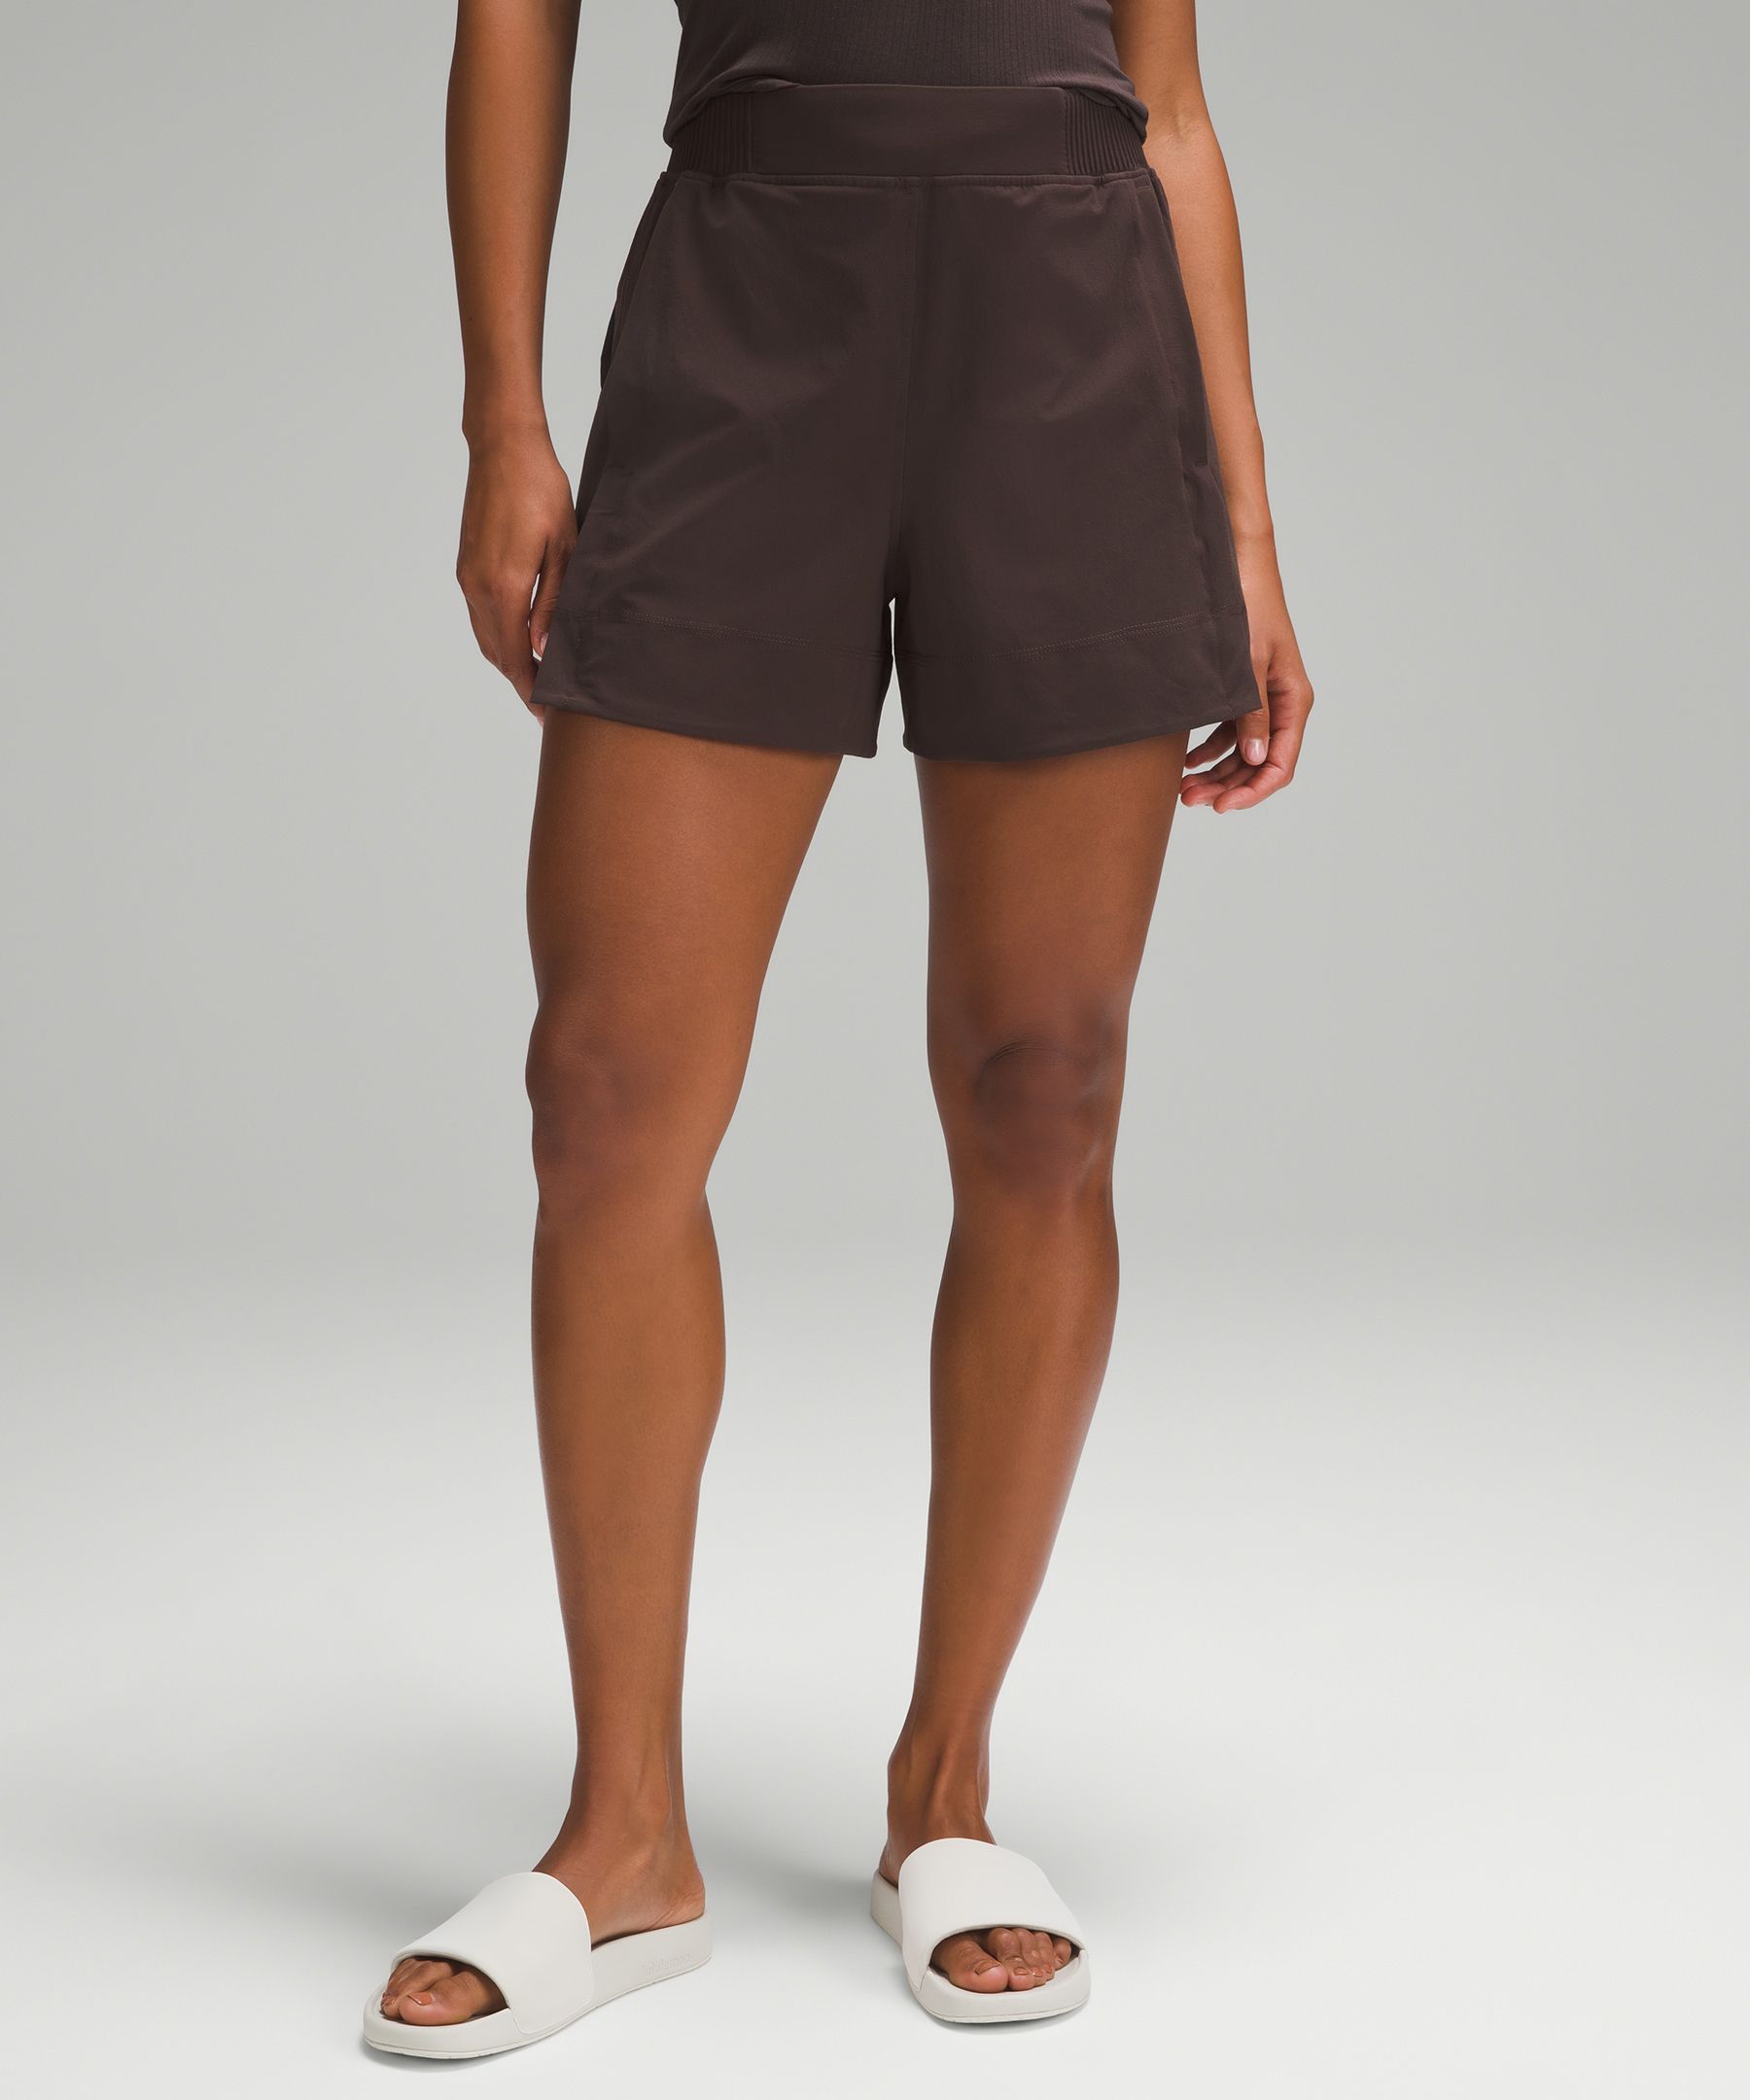 Lululemon Stretch Woven Relaxed-fit High-rise Shorts 4"